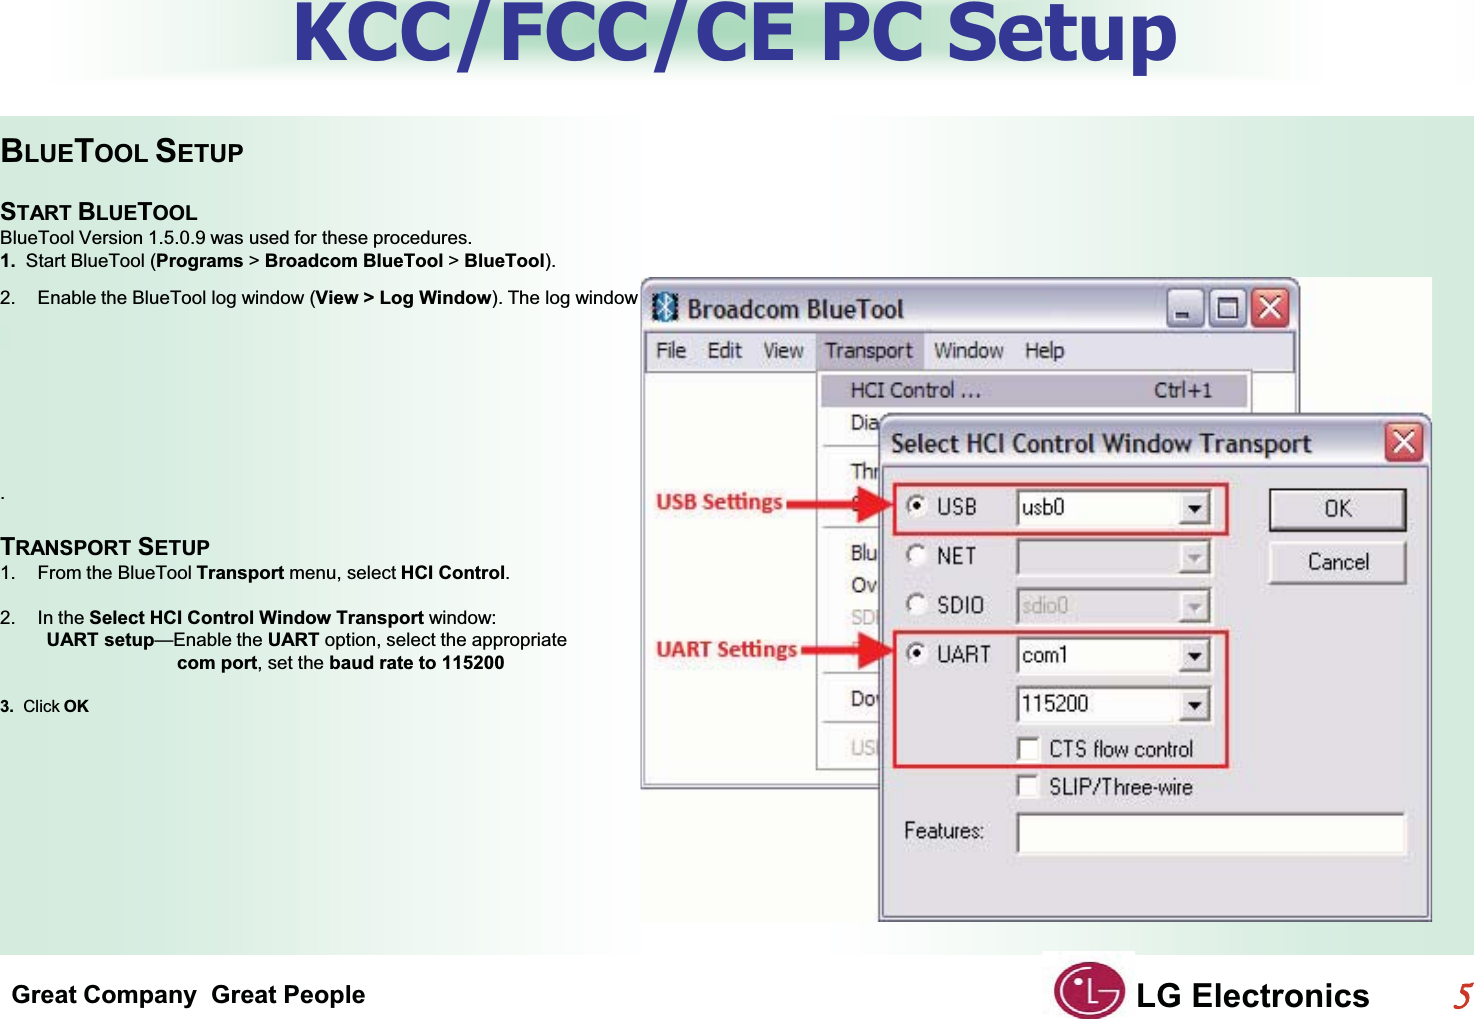 Great Company  Great People LG Electronics55  KCC/FCC/CE PC SetupBLUETOOL SETUPGSTART BLUETOOLGBlueTool Version 1.5.0.9 was used for these procedures.1.  Start BlueTool (Programs &gt;Broadcom BlueTool &gt;BlueTool).GG2. Enable the BlueTool log window (View &gt; Log Window). The log window is used to verify commands issued and display the results of those commands.GGTRANSPORT SETUPG1. From the BlueTool Transport menu, select HCI Control.2. In the Select HCI Control Window Transport window:G         UART setup—Enable the UART option, select the appropriate                                  com port, set the baud rate to 1152003.  Click OKGG.G